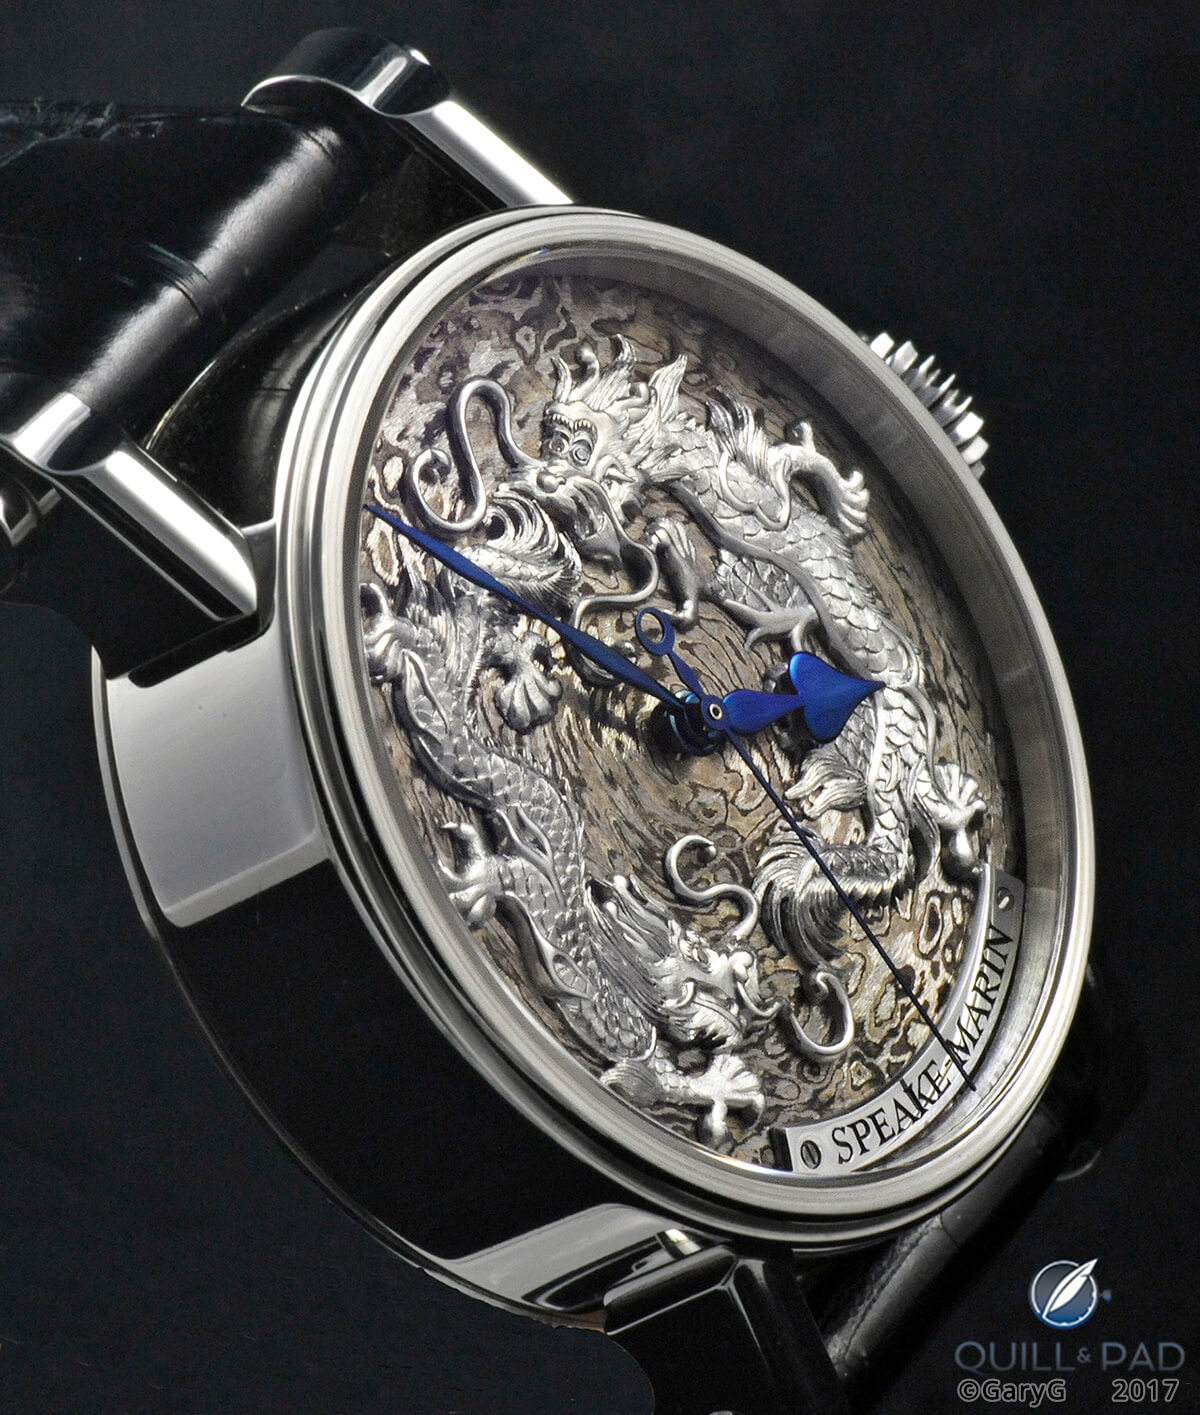 Fighting Time by Peter Speake-Marin and Kees Engelbarts